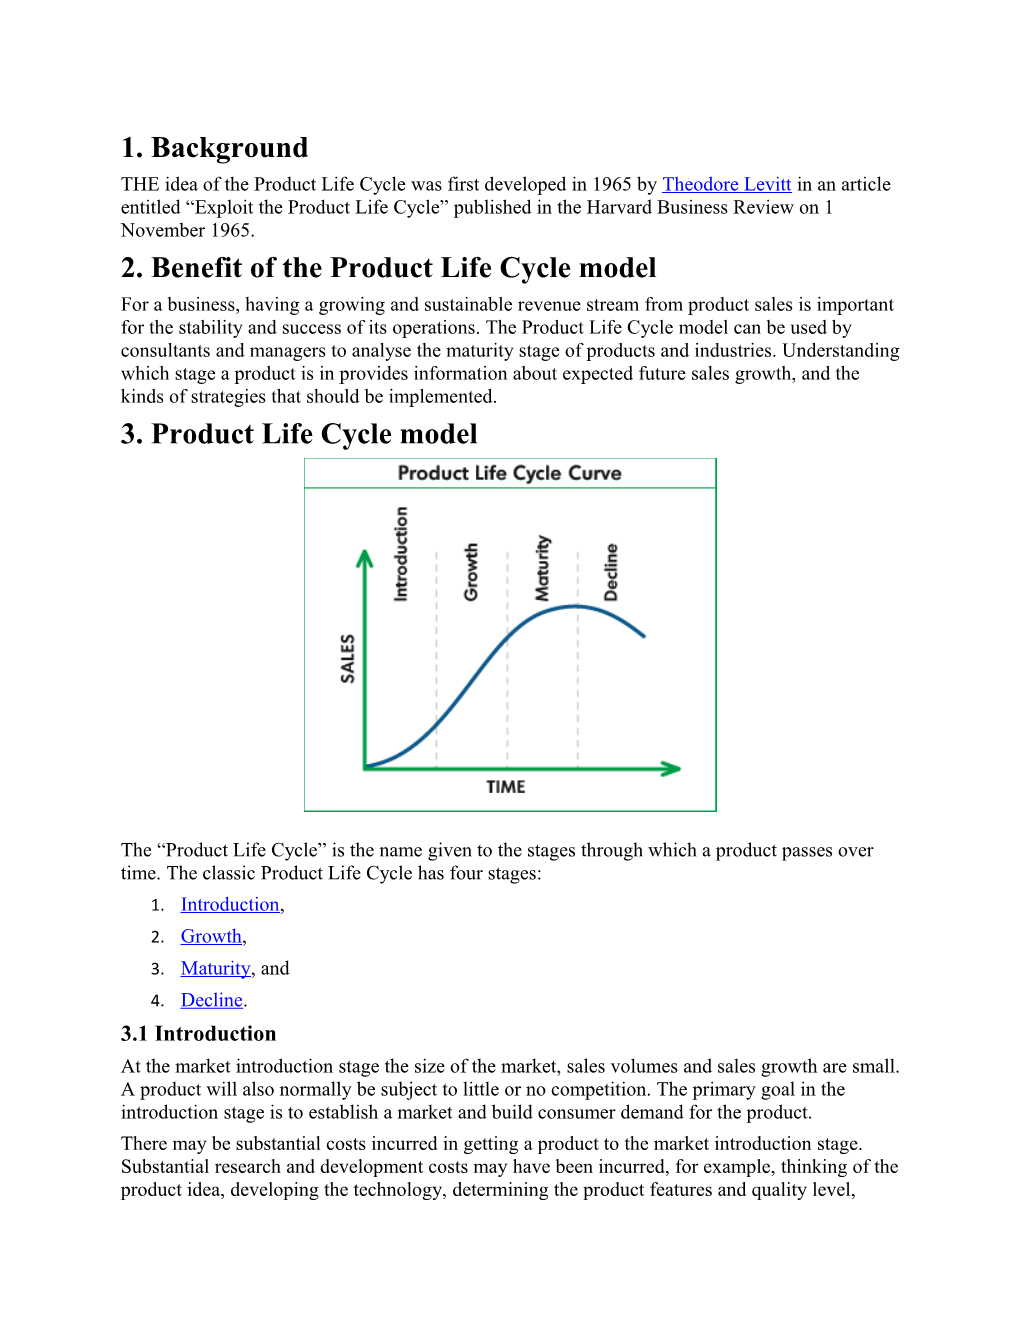 2. Benefit of the Product Life Cycle Model